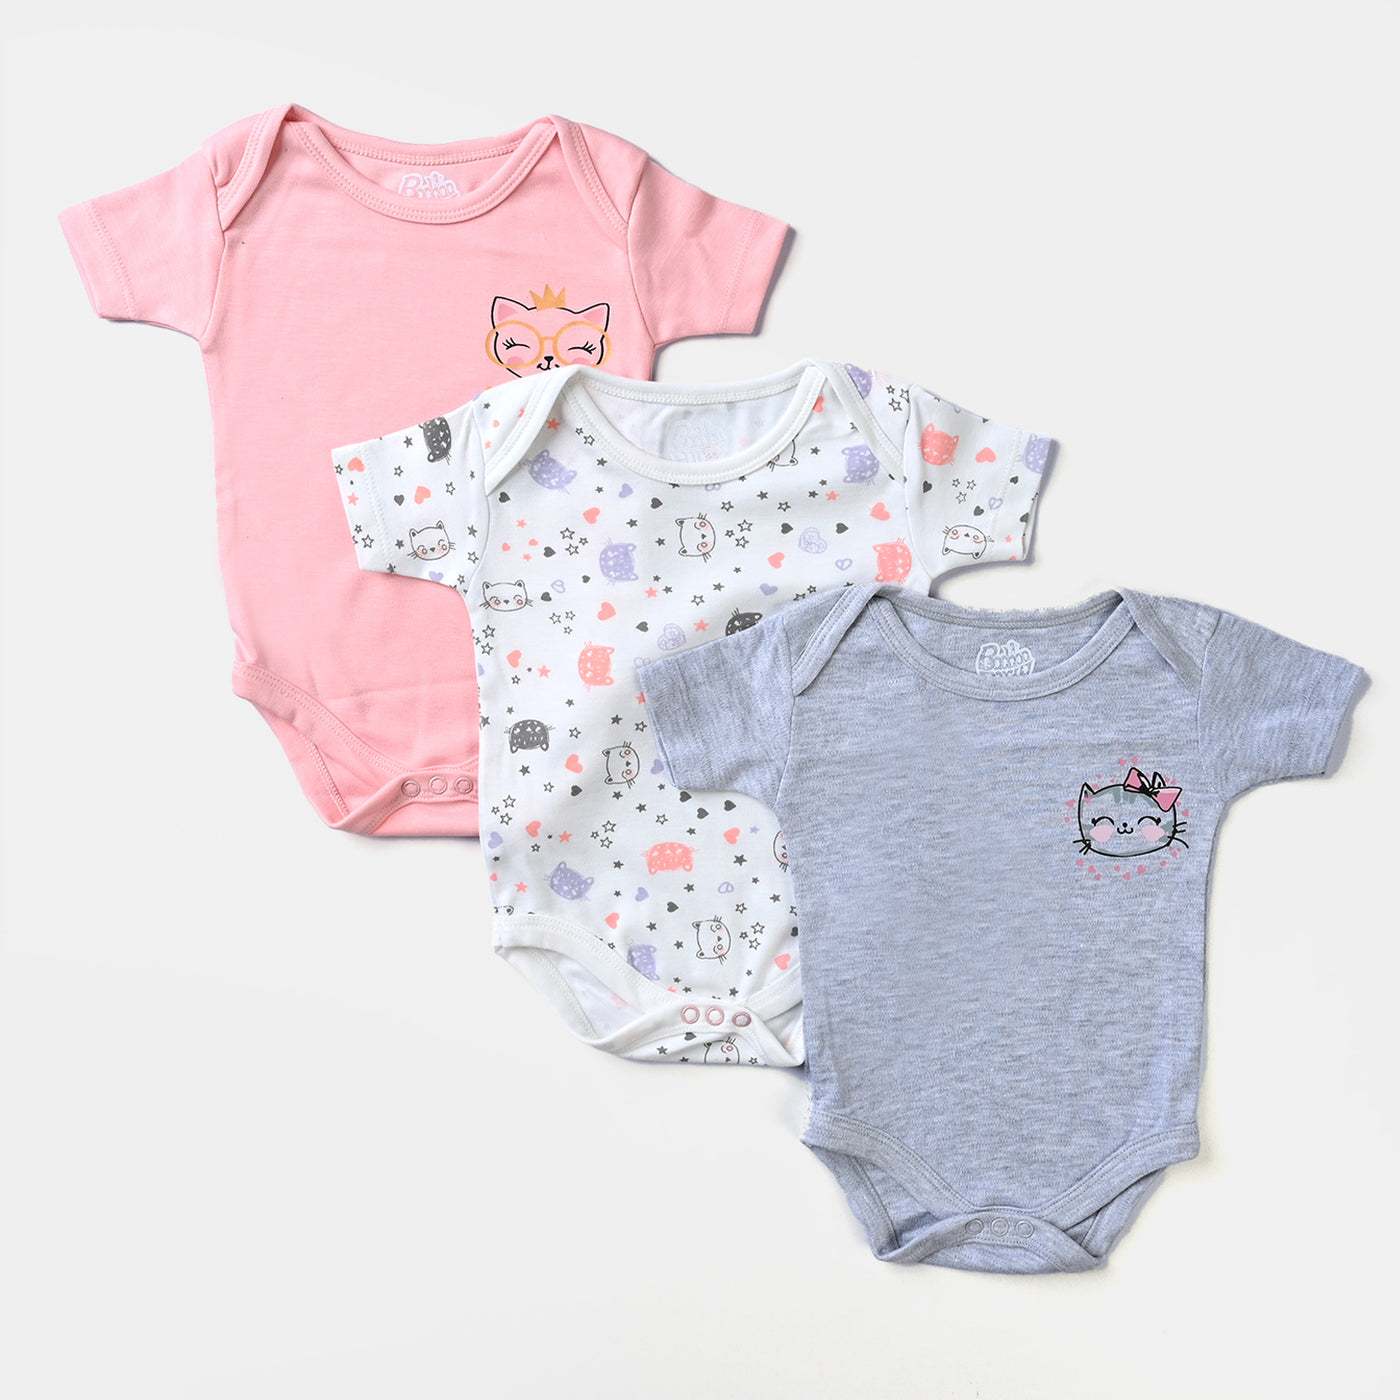 Pack of 3 Infant Baby Body Suit